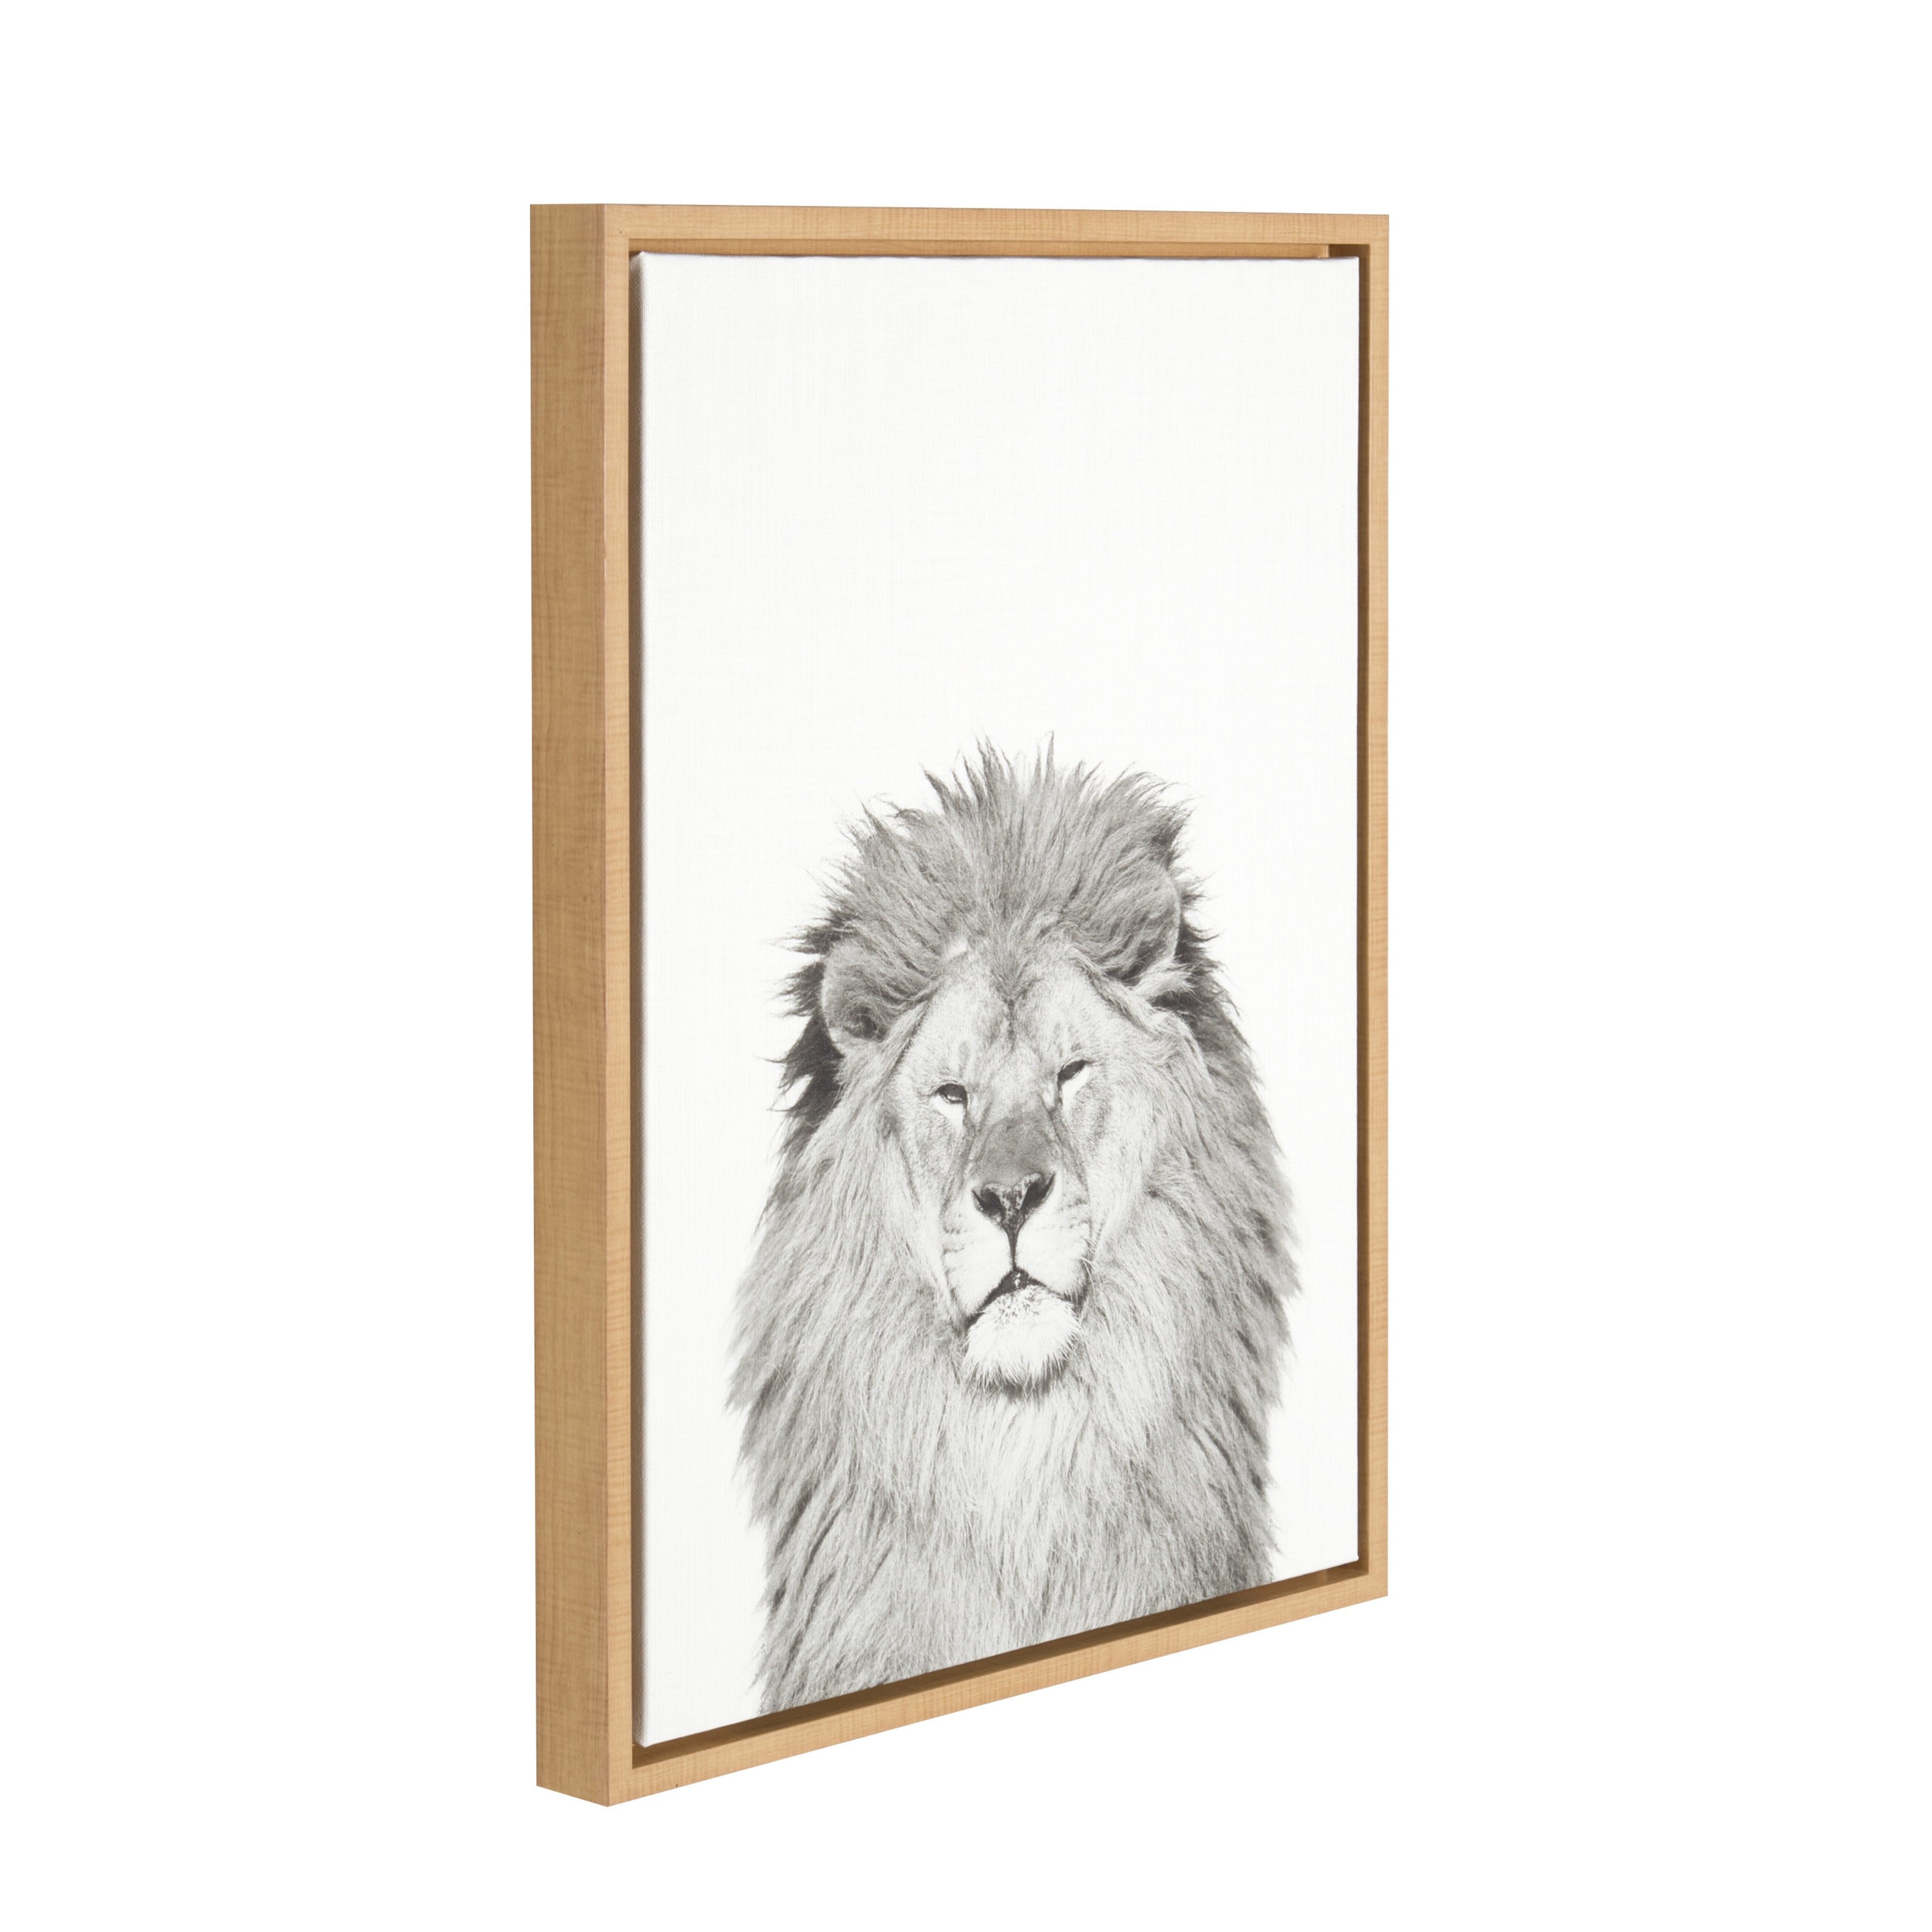 Kate and Laurel Sylvie Lion Animal Portrait Framed Canvas Wall Art by Simon  Te Tai, 18x24 Natural On Sale Bed Bath  Beyond 14767947